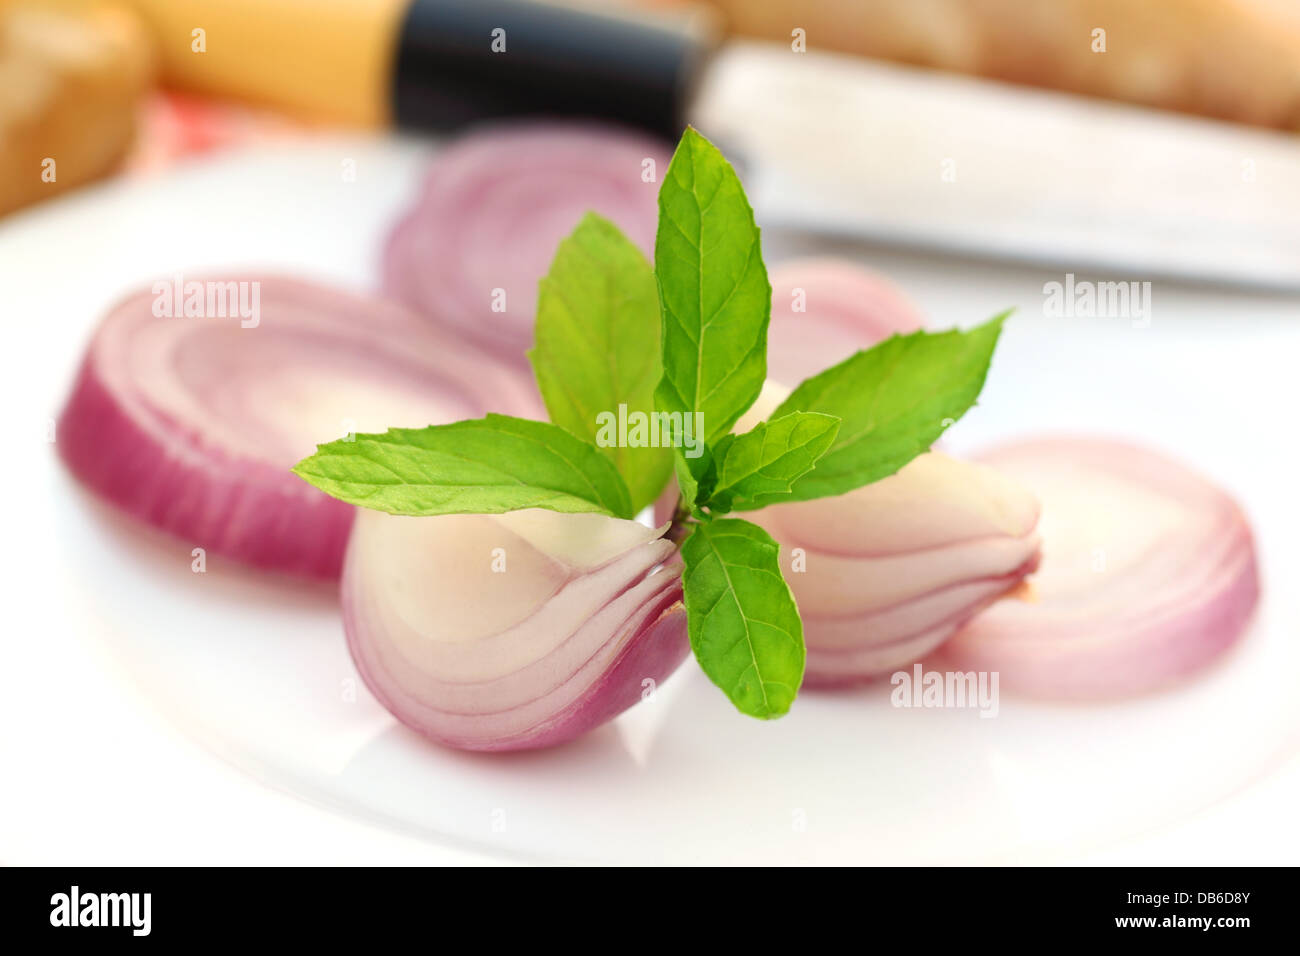 Sliced onion with mint leaves Stock Photo